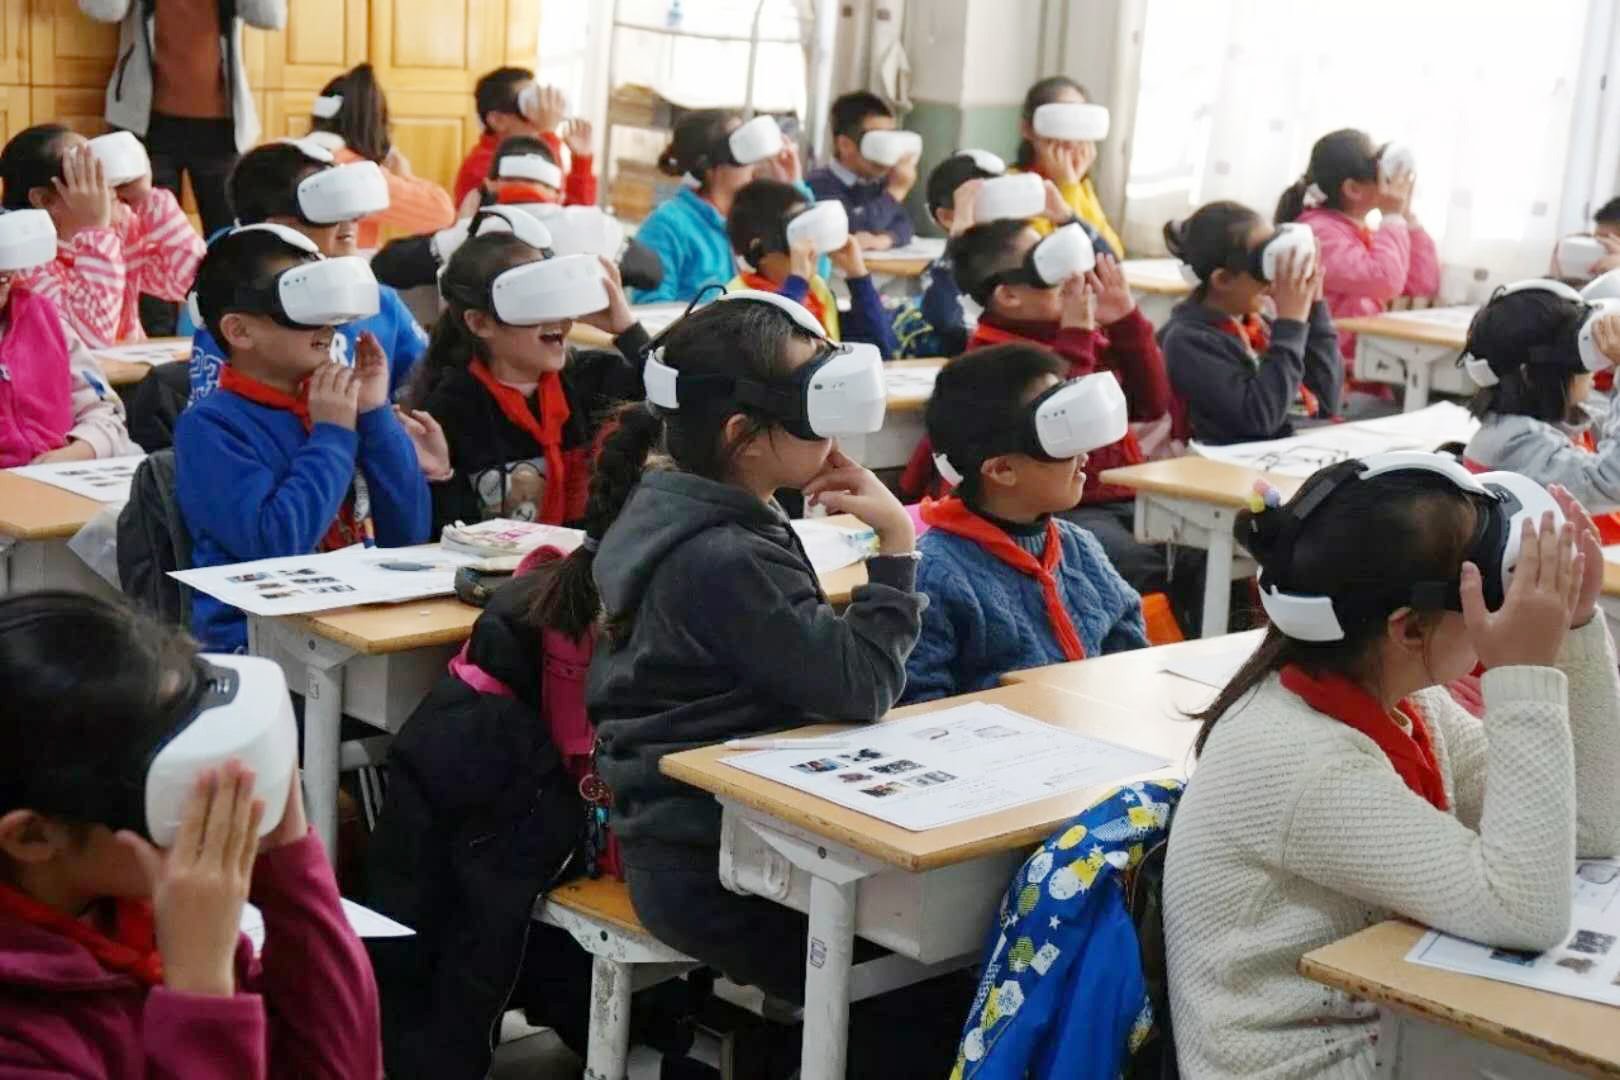 Students-in-Beijing-Elementary-School-Tongzhou-Branch-School-used-DPVR-M2-virtual-reality-headset-in-the-classroom